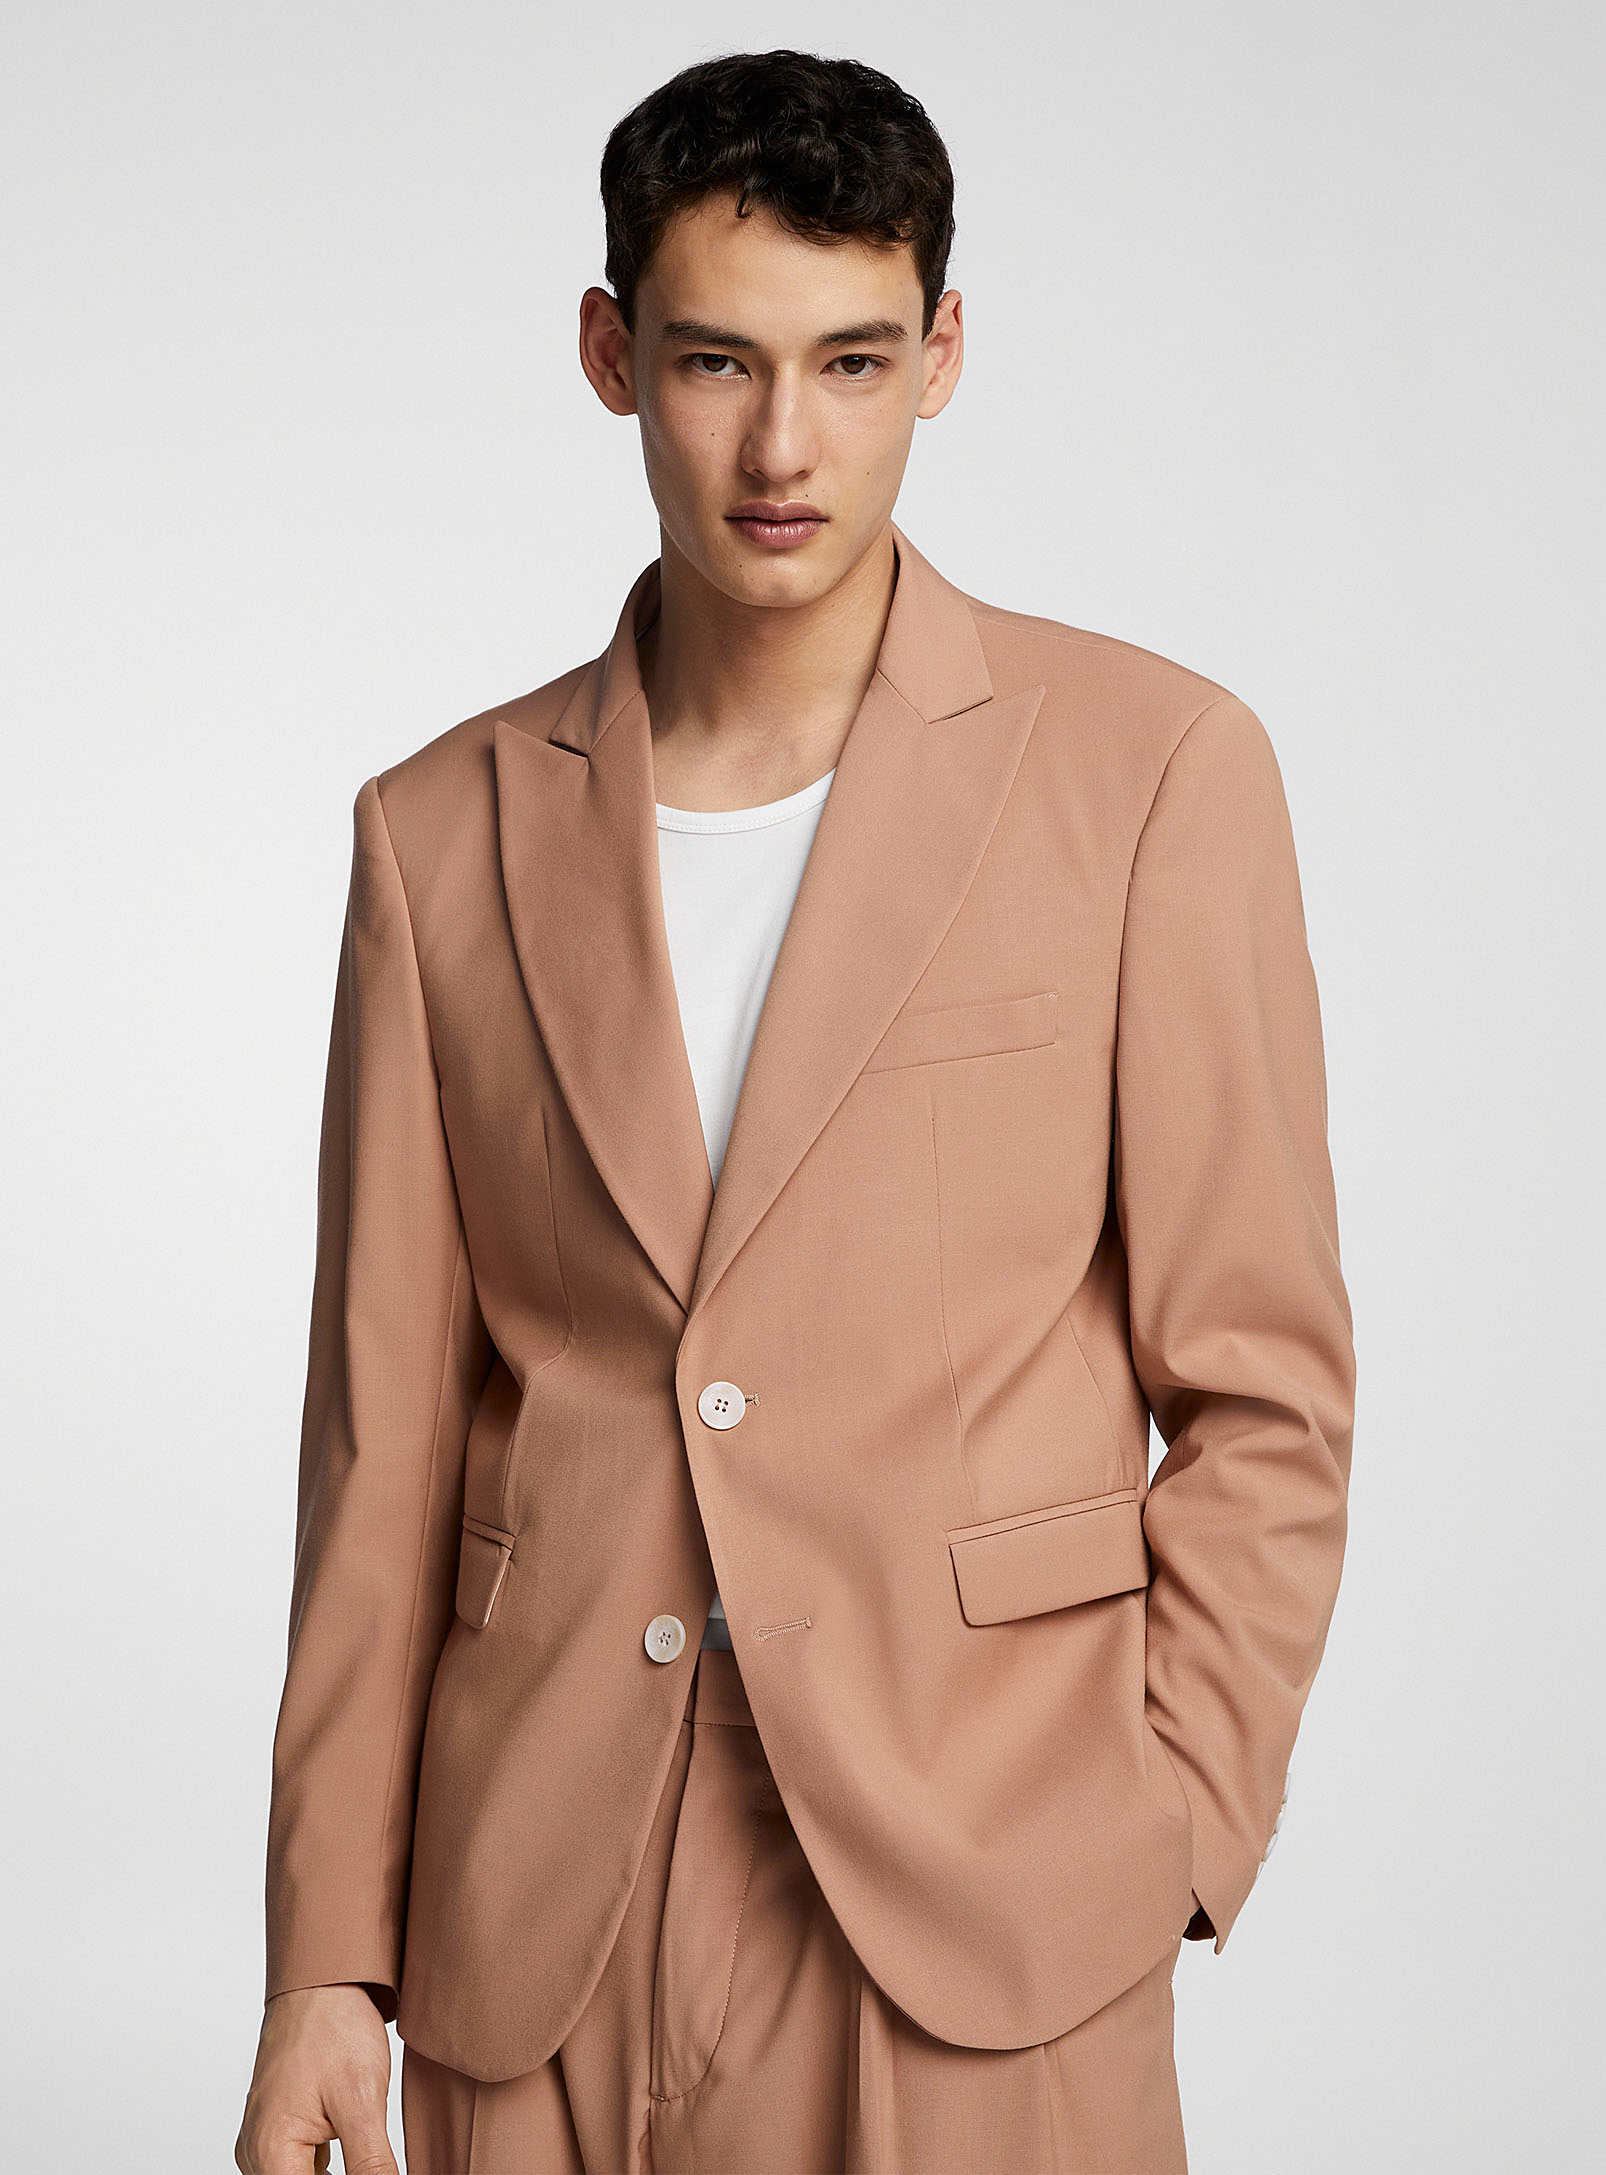 I'M BRIAN - Men's Pink pleated stretch jacket